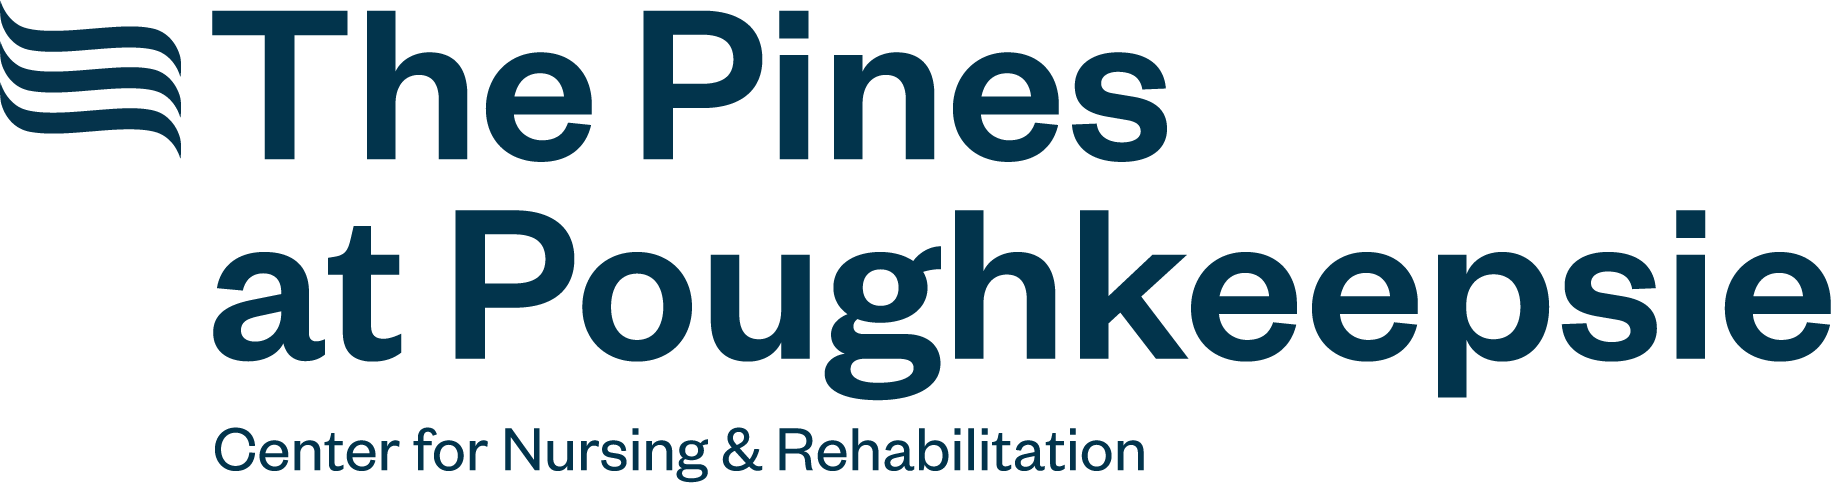 The Pines at Poughkeepsie Center for Nursing and Rehabilitation